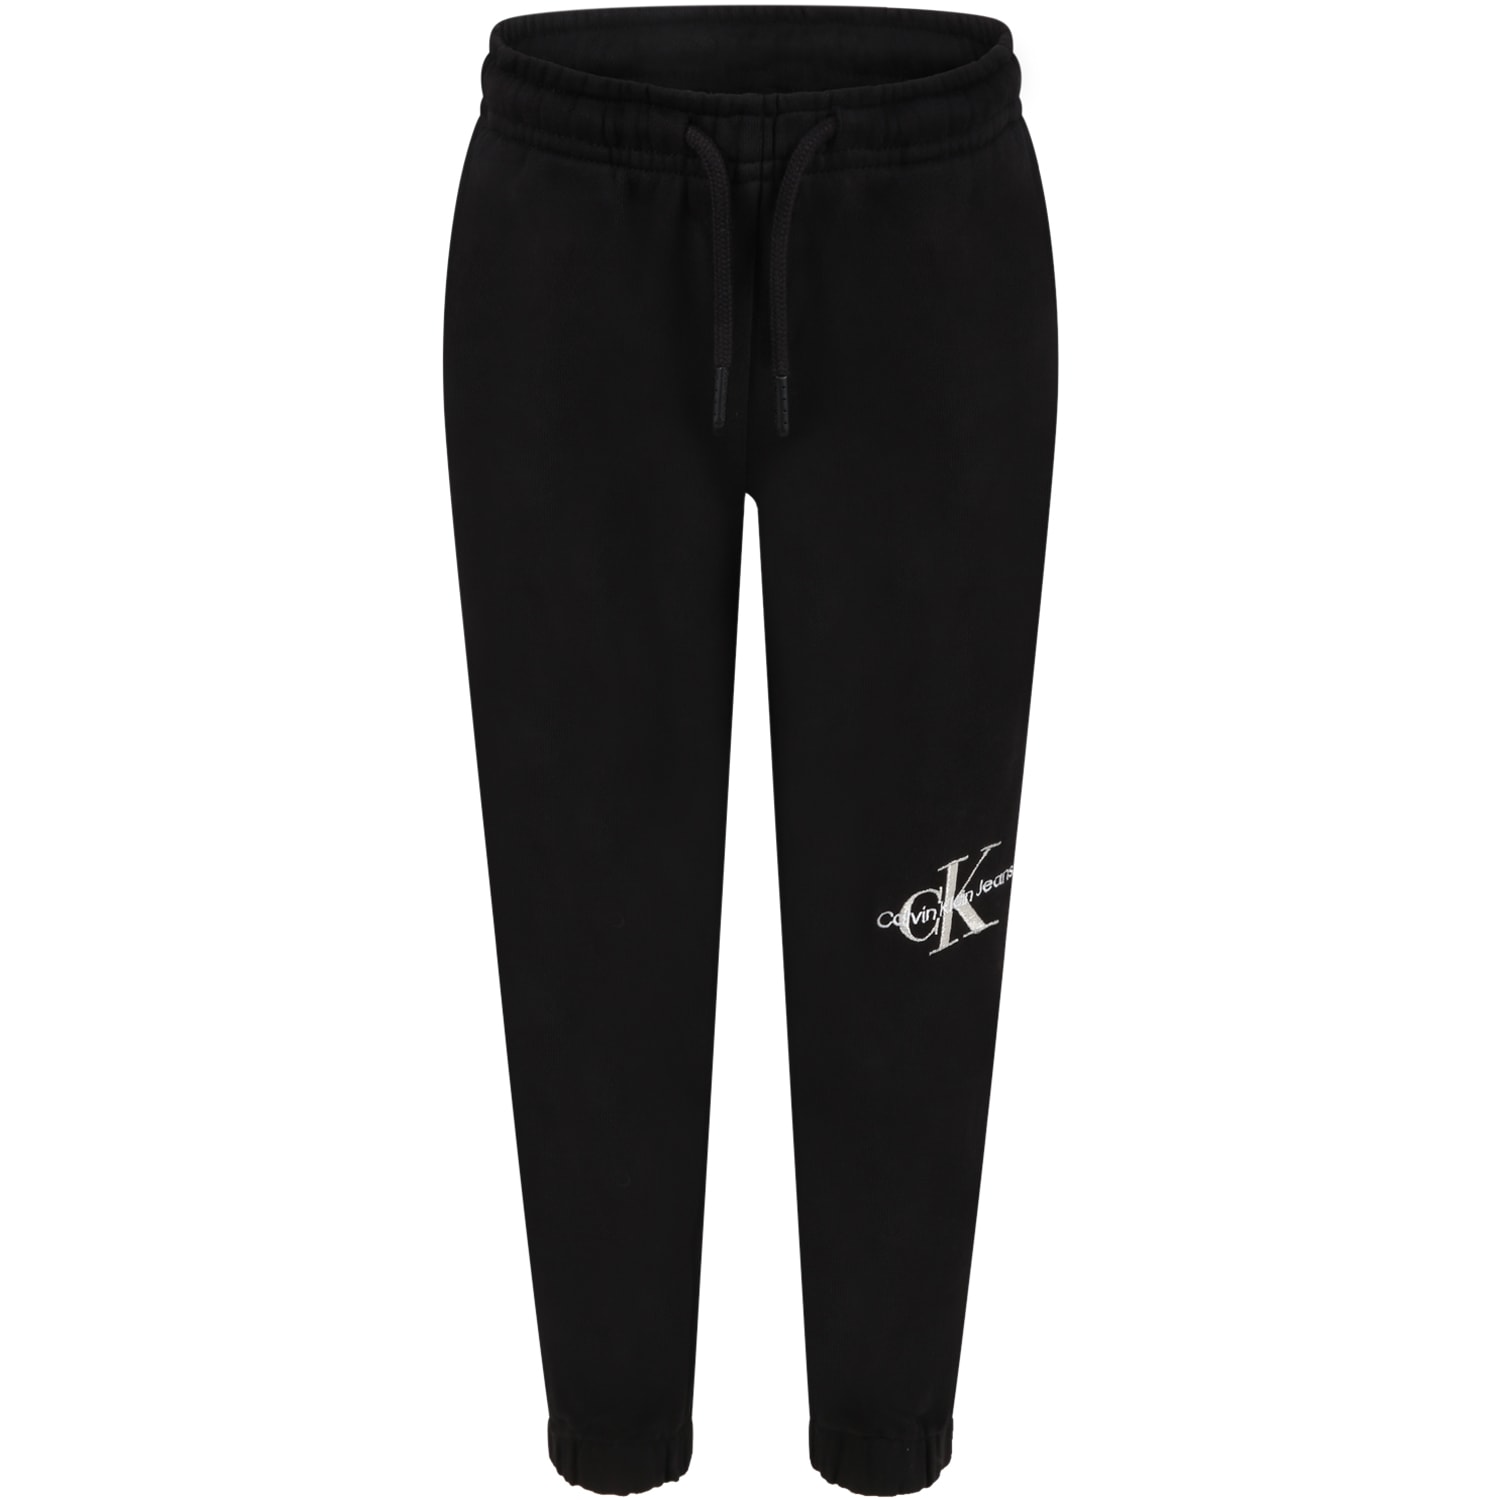 Calvin Klein Black Sweatpants For Kids With Silver Logo